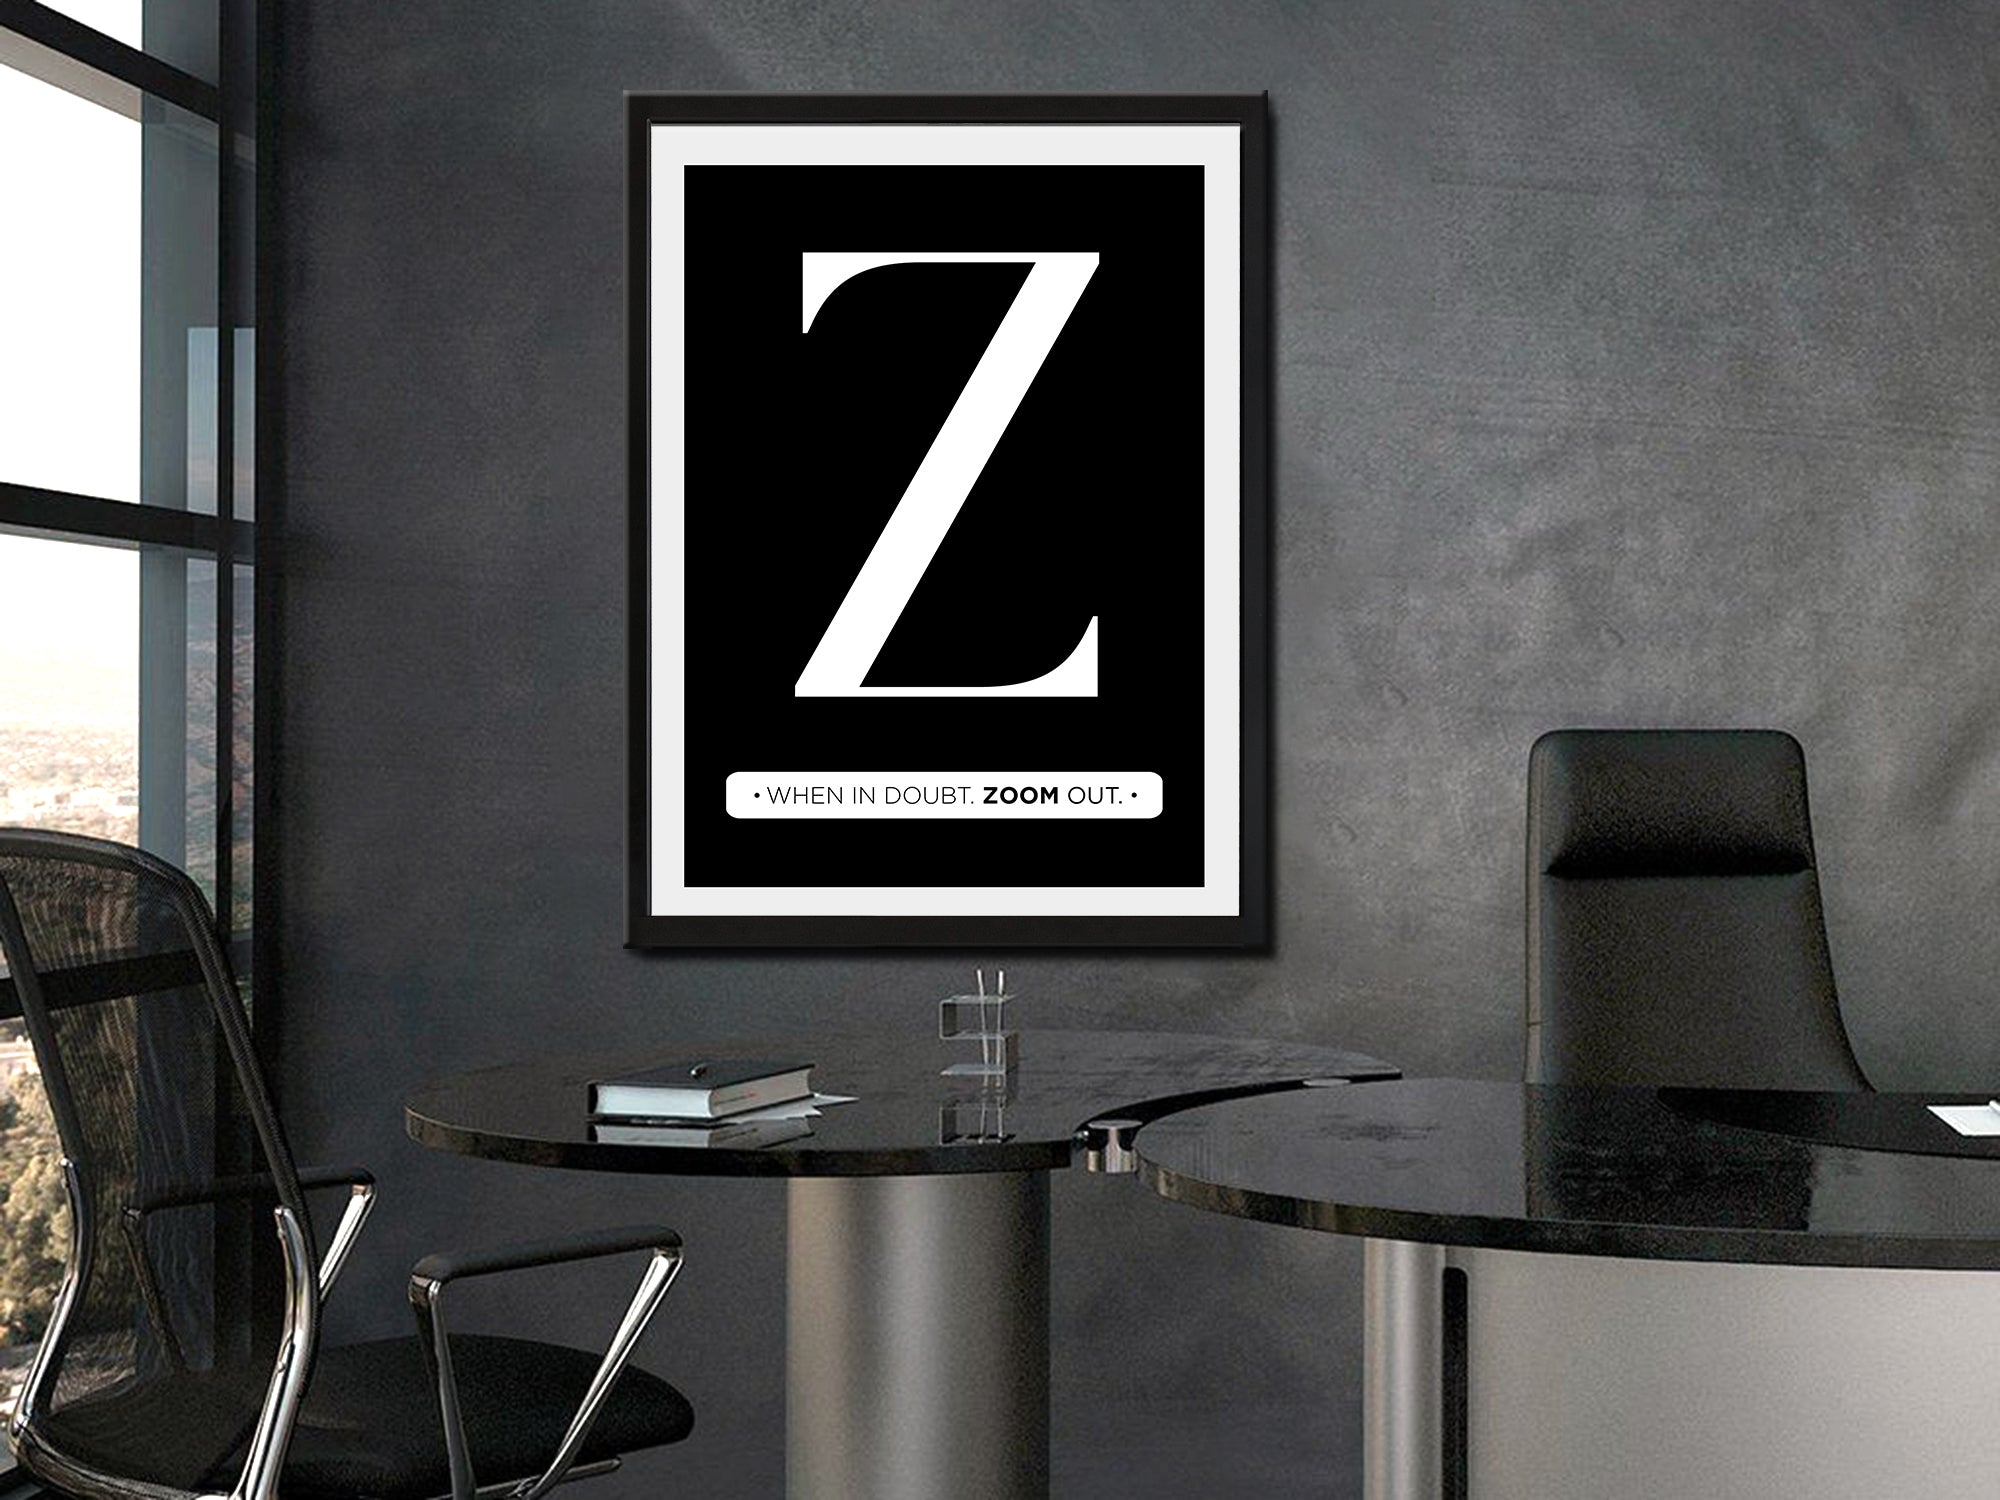 When In Doubt Zoom Out - Living Room - Canvas Wall Art